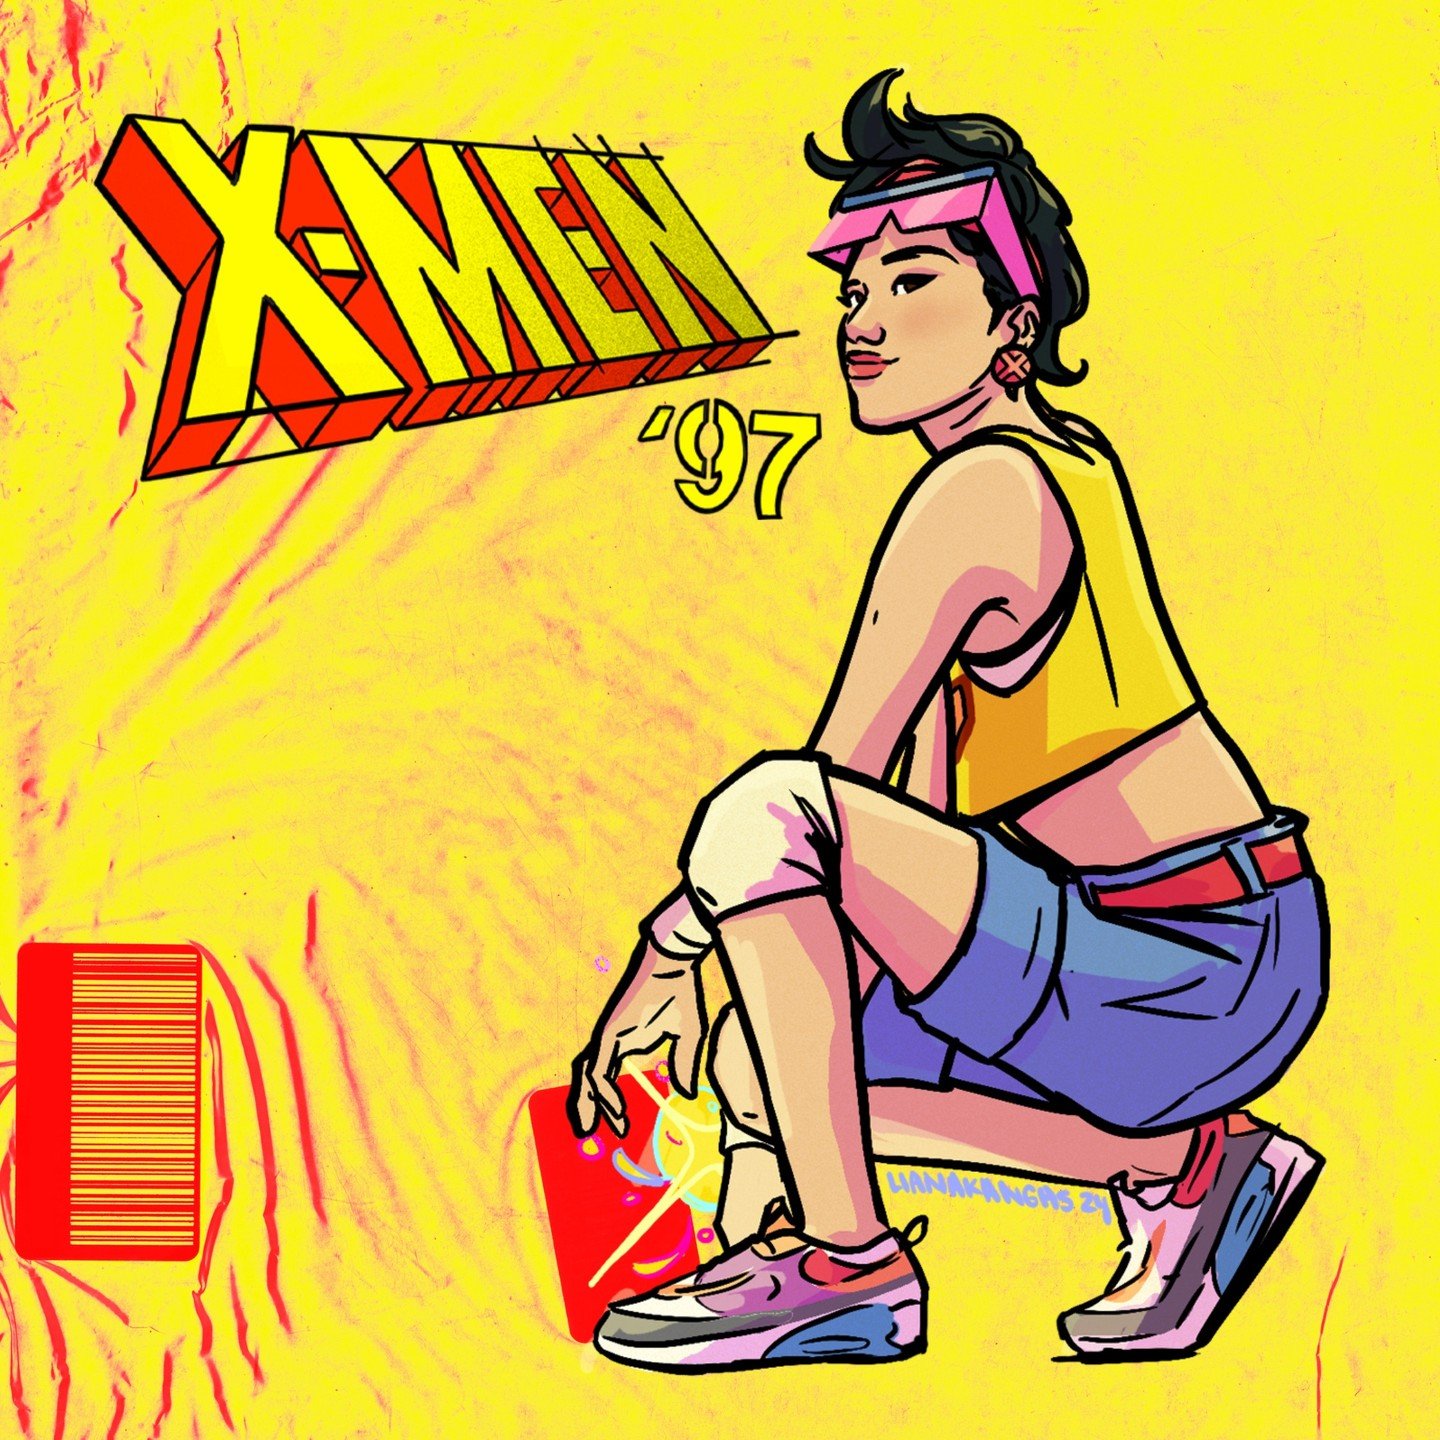 Super stoked that Jubilee has had such a fun storyline in #xmen97 so far! 🎉